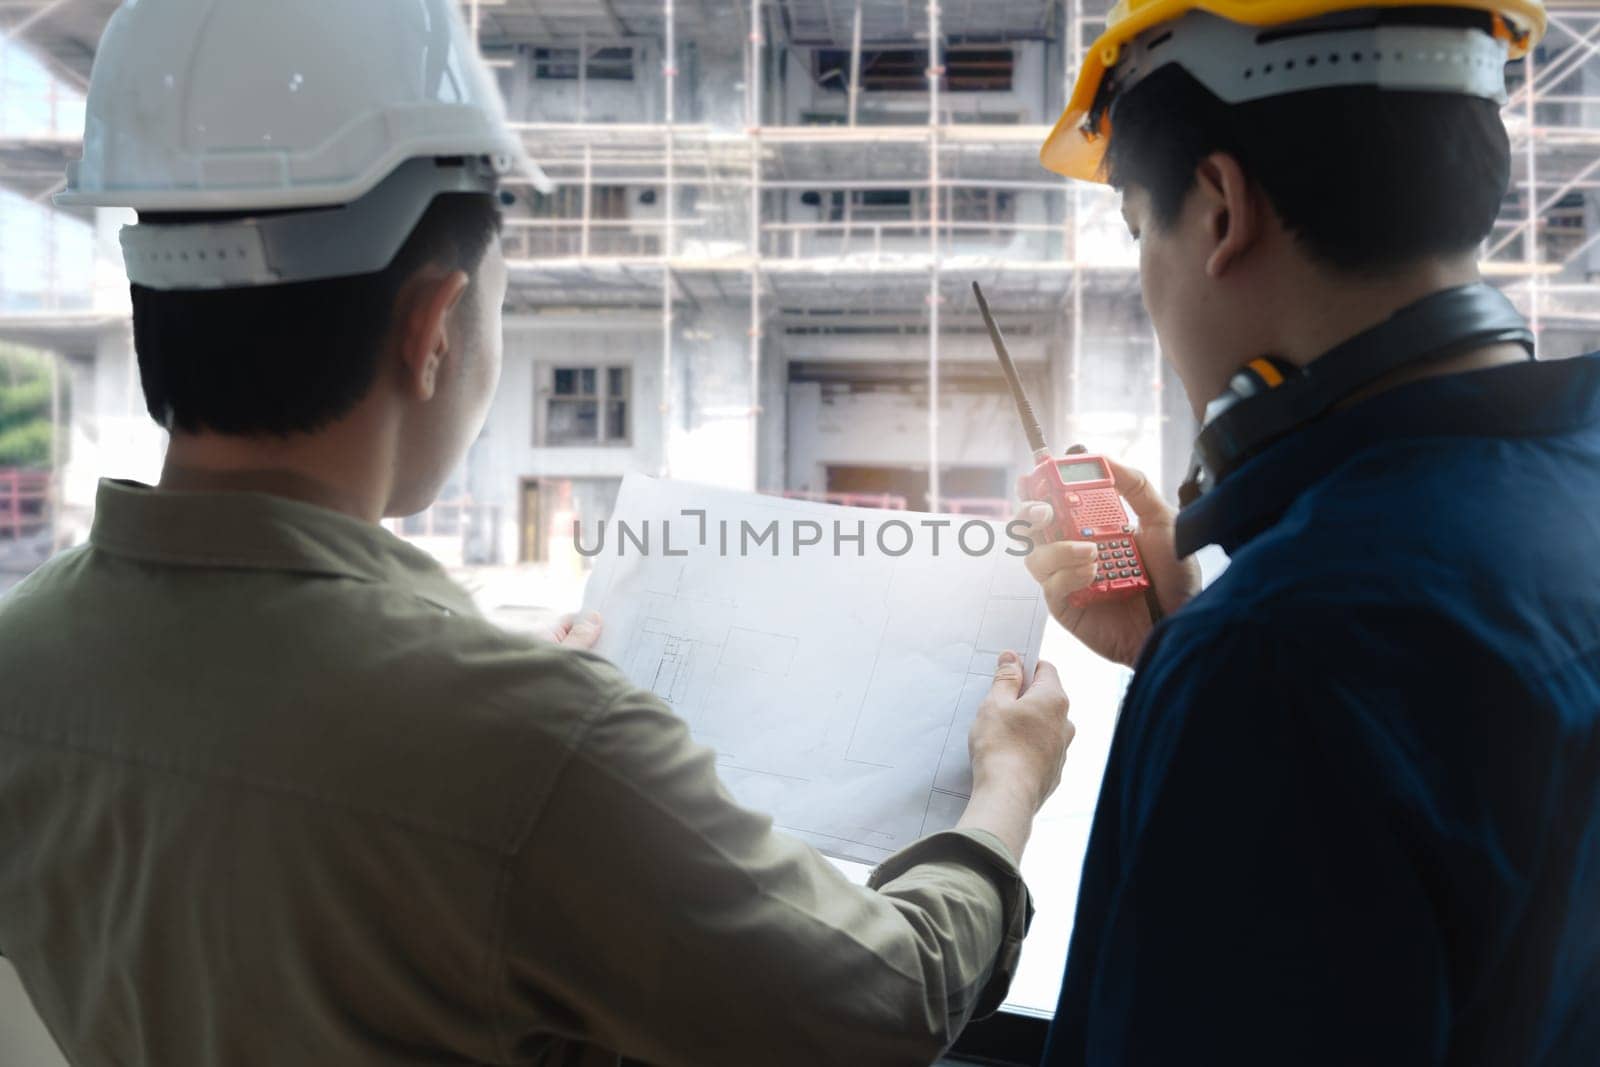 Civil engineers and architects inspecting and working building site with blueprints and holding walkie talkie.